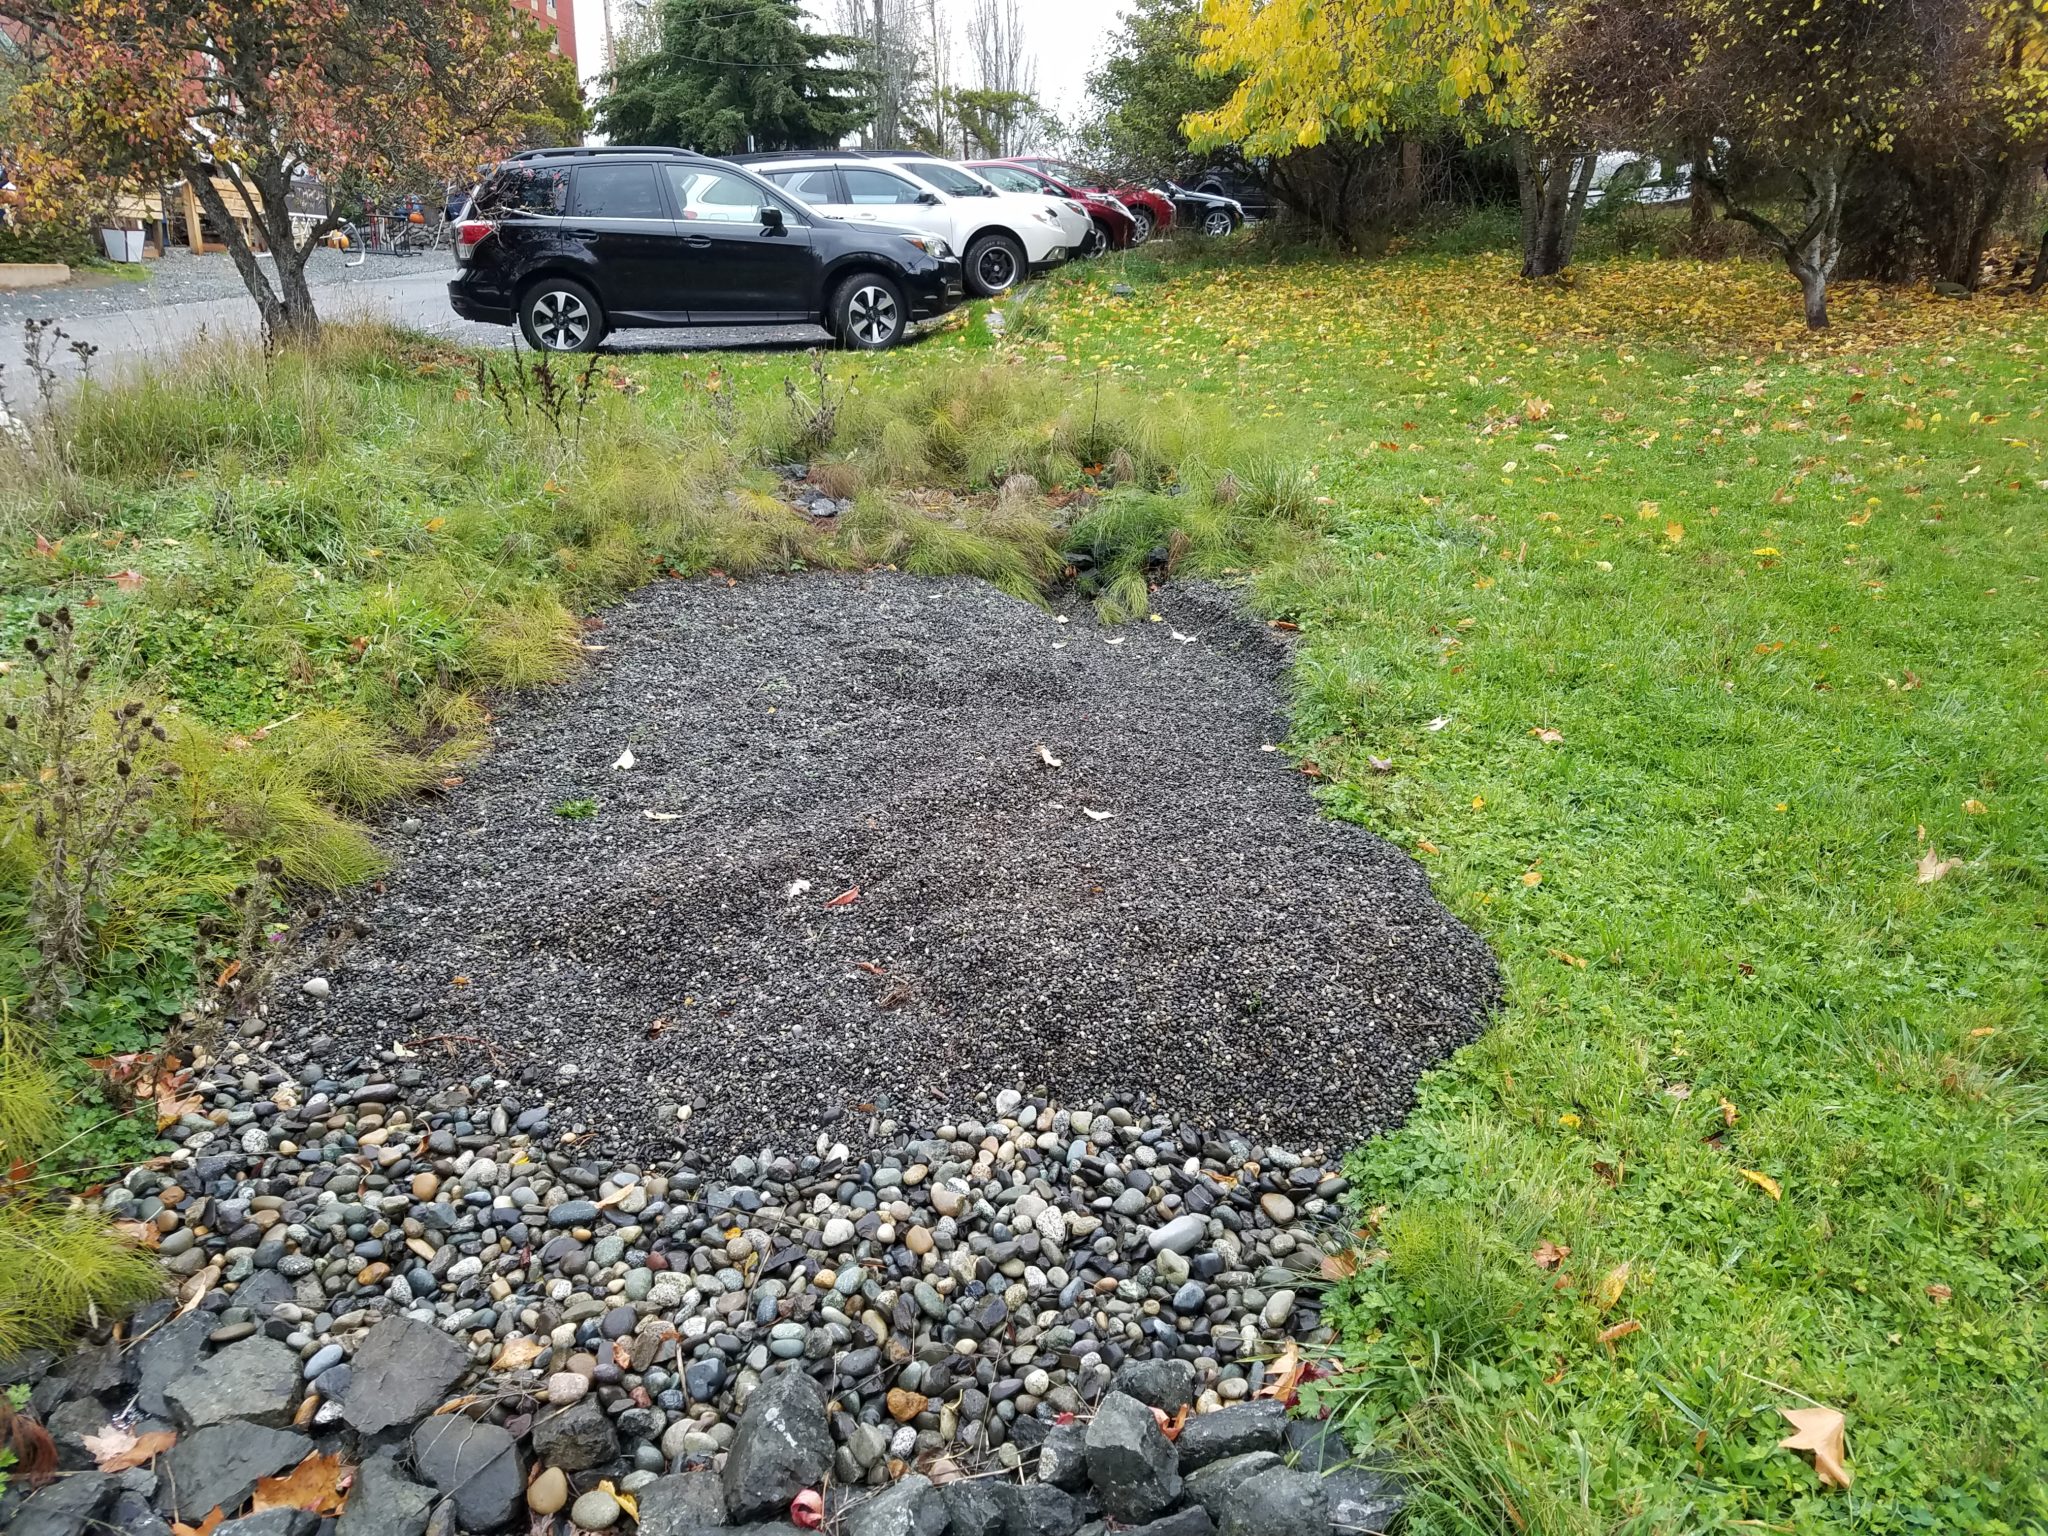 Gravel and sand are excellent filters for stormwater. Sediment and pollutants from the road get captured here.